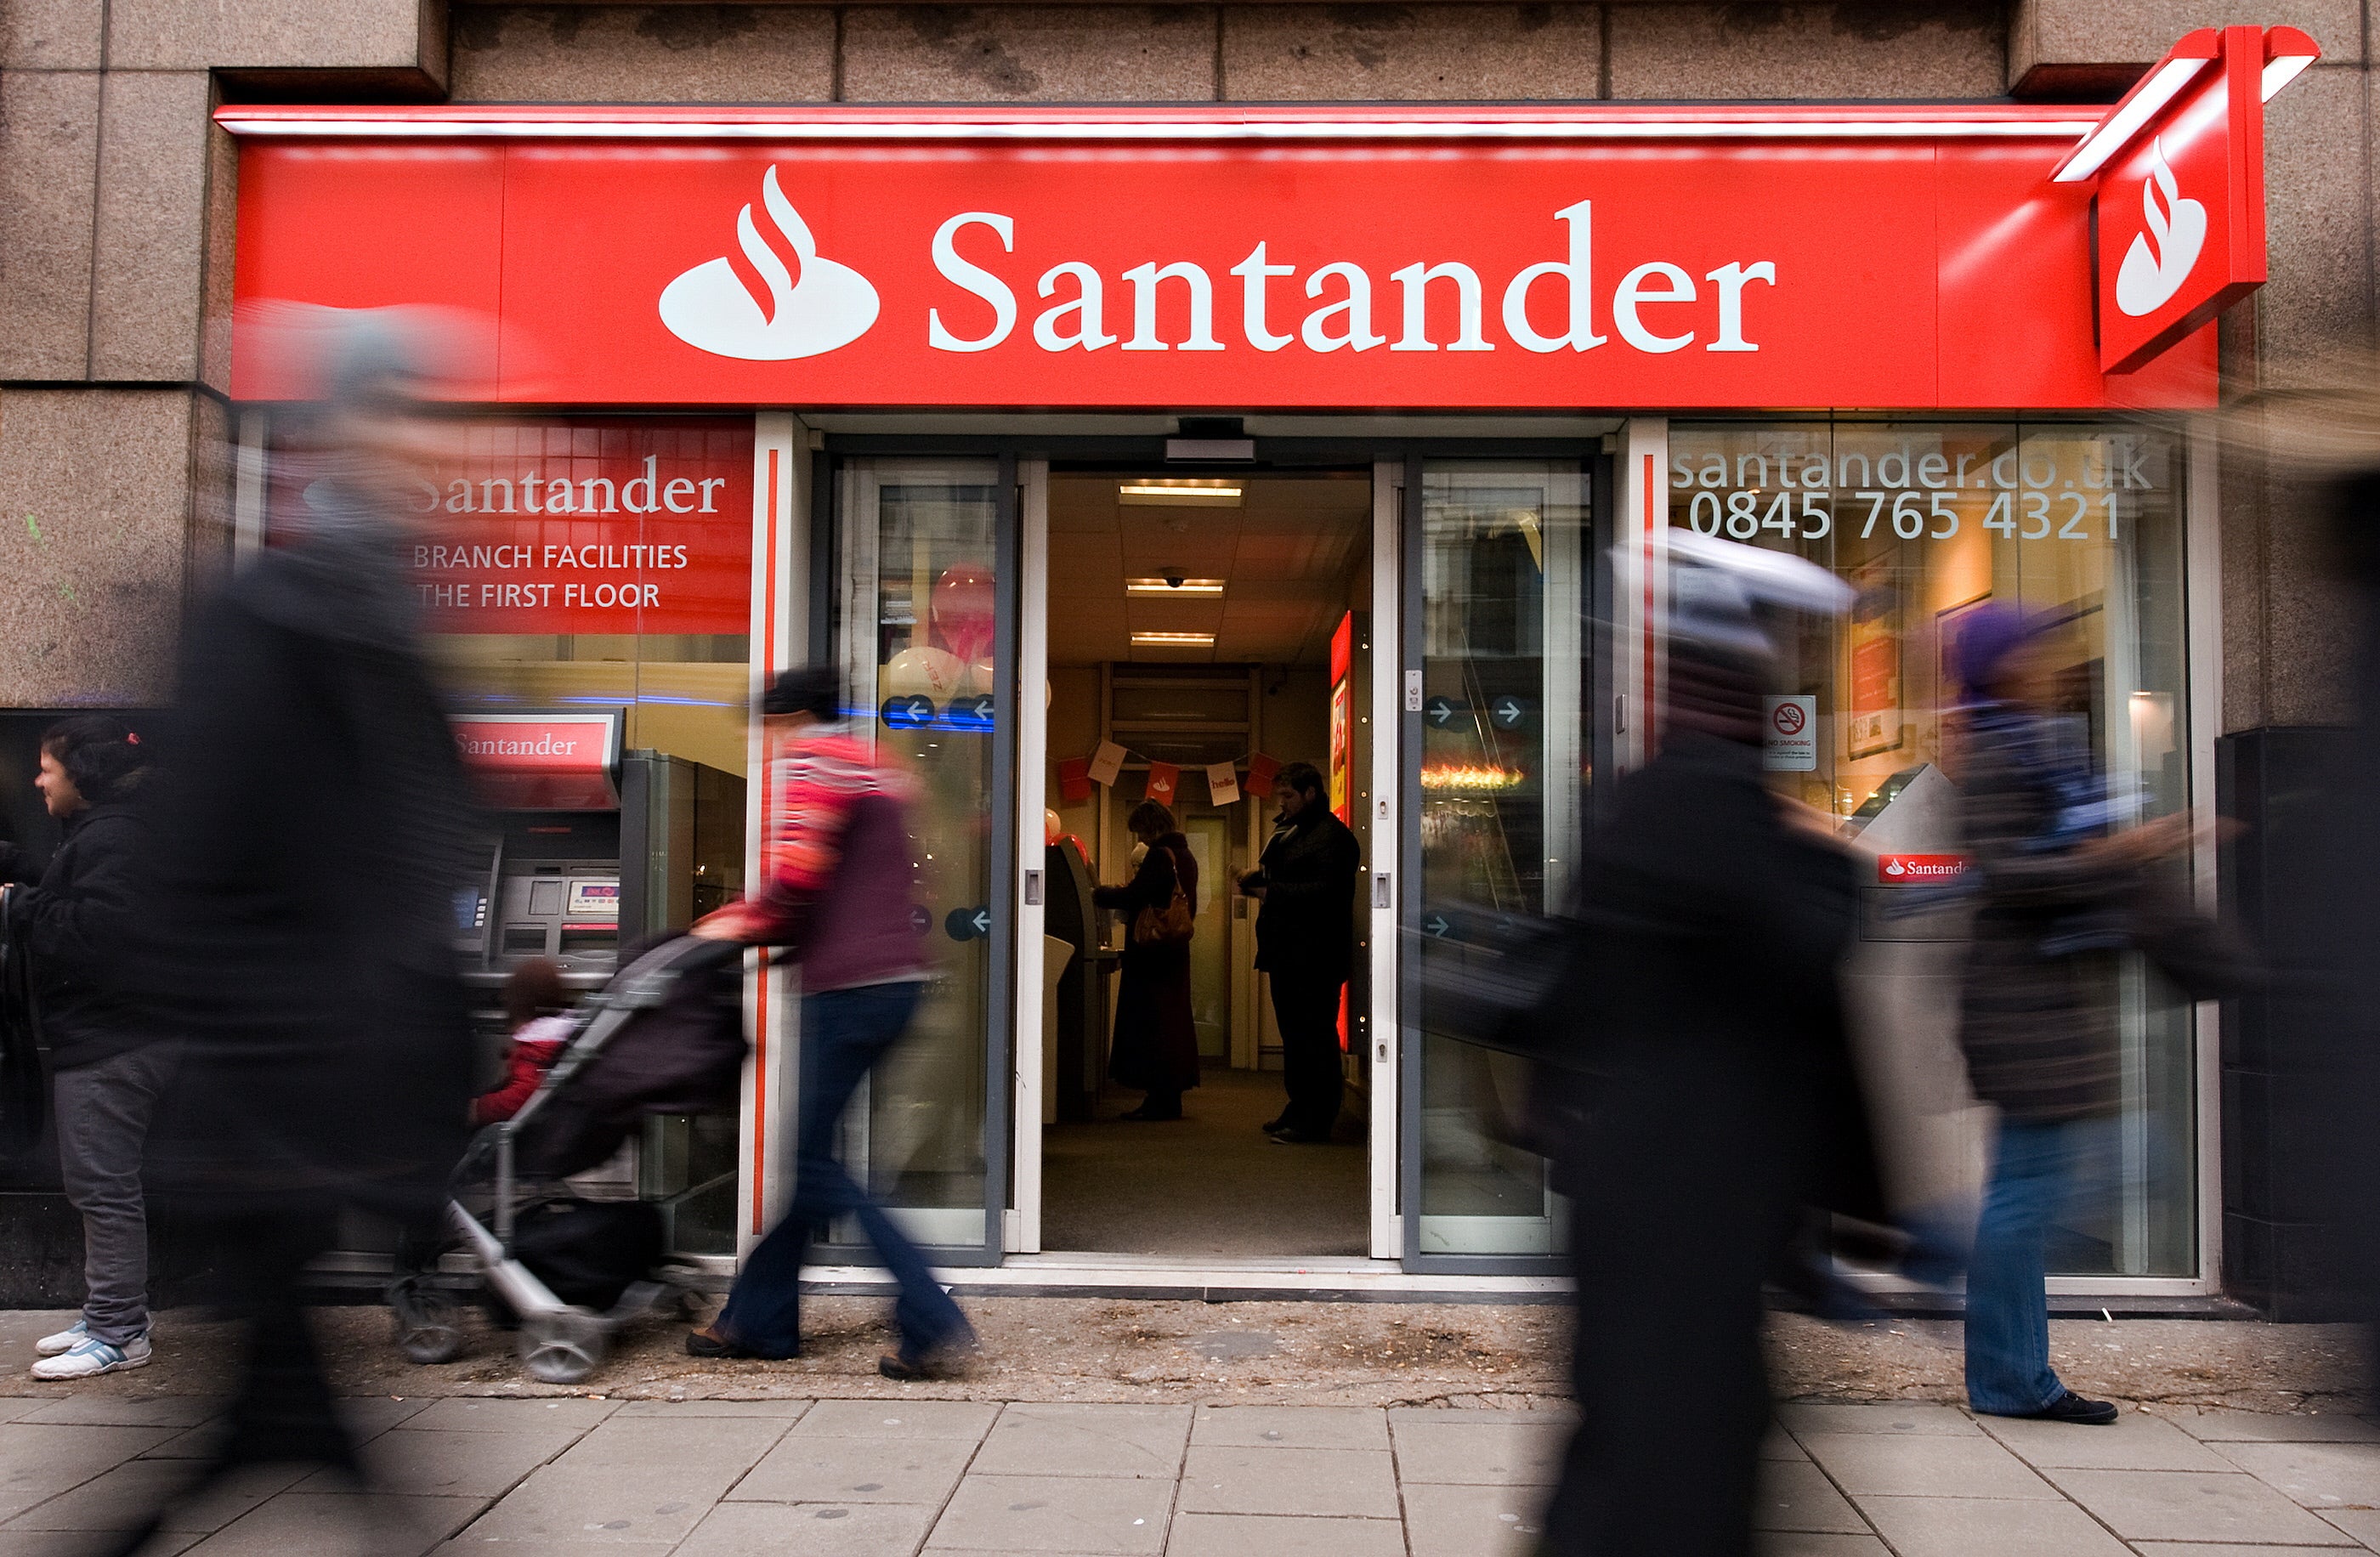 Santander says branch transactions fell by a third over the two years before the pandemic and halved again in 2020